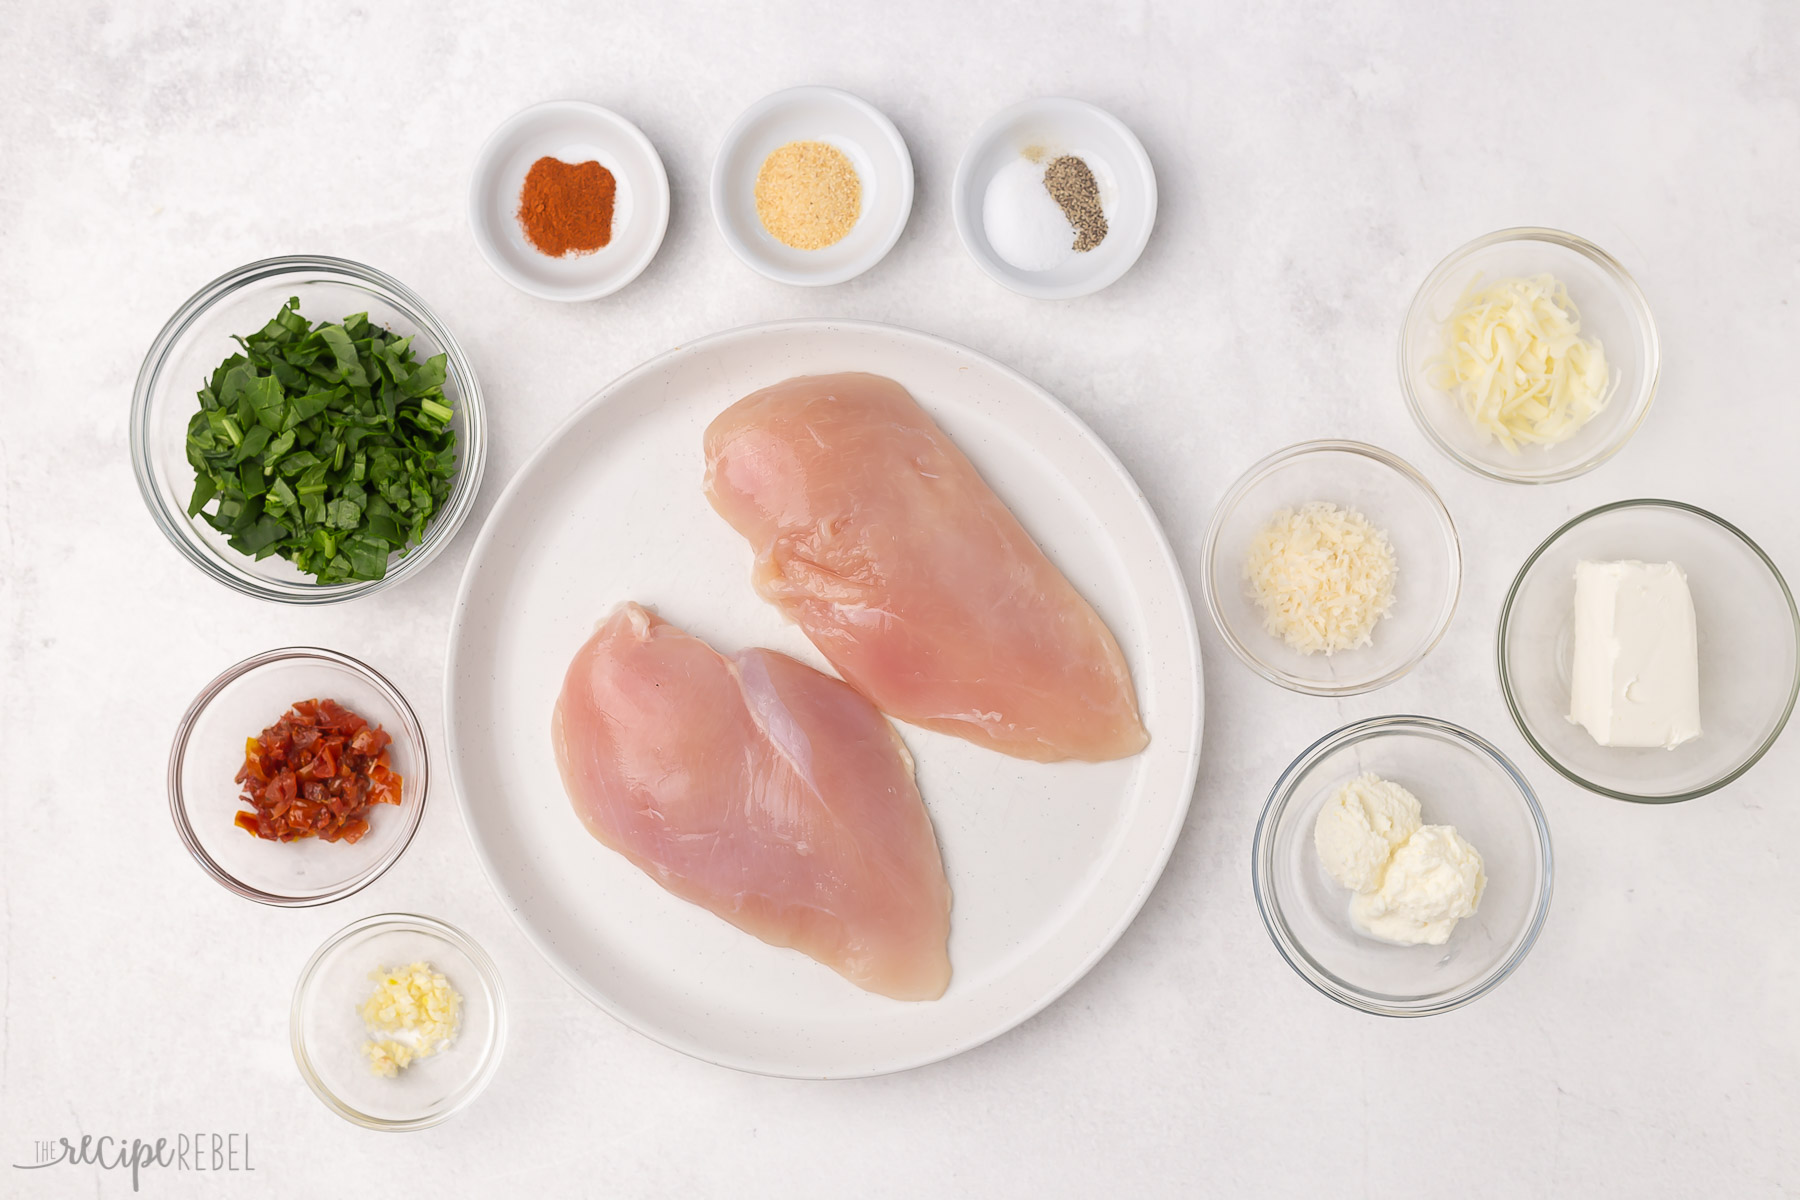 Overhead shot of ingredients for spinach stuffed chicken breasts.